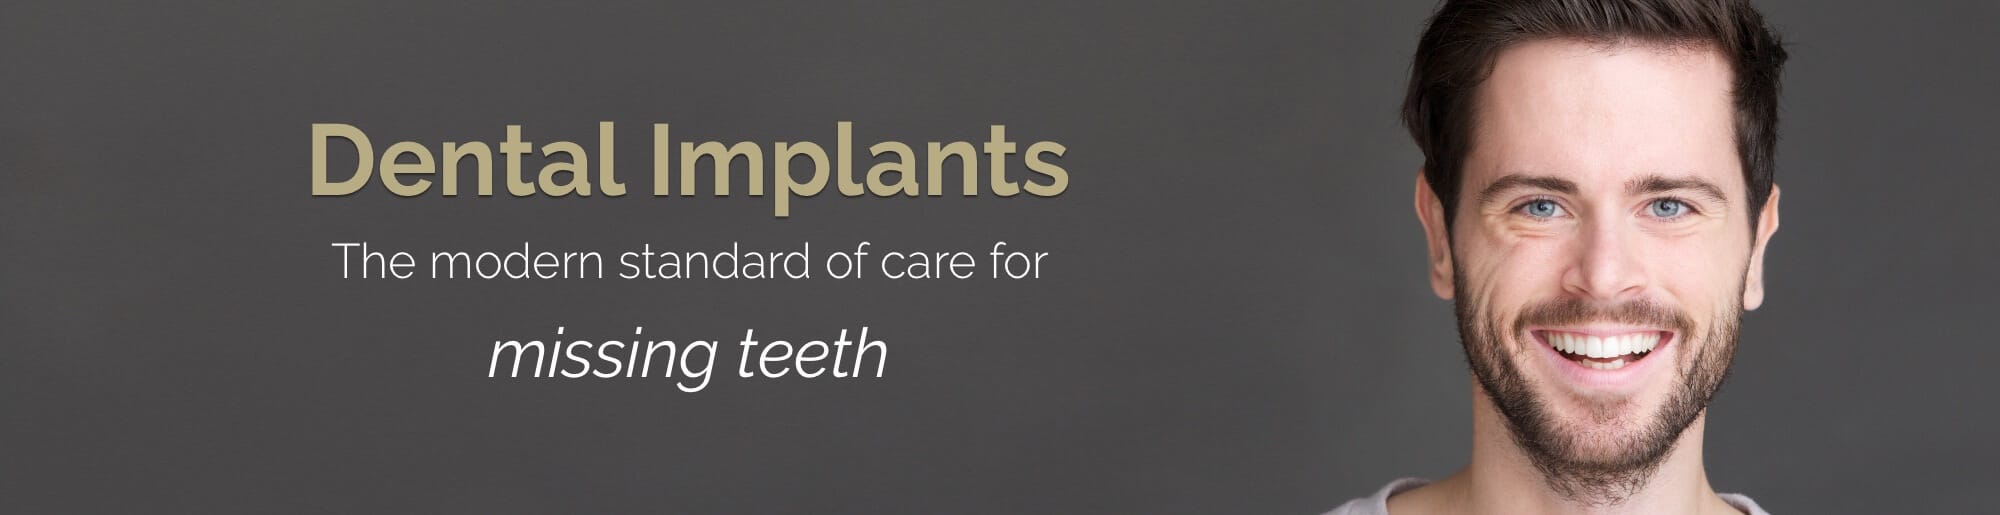 dental implants for adults